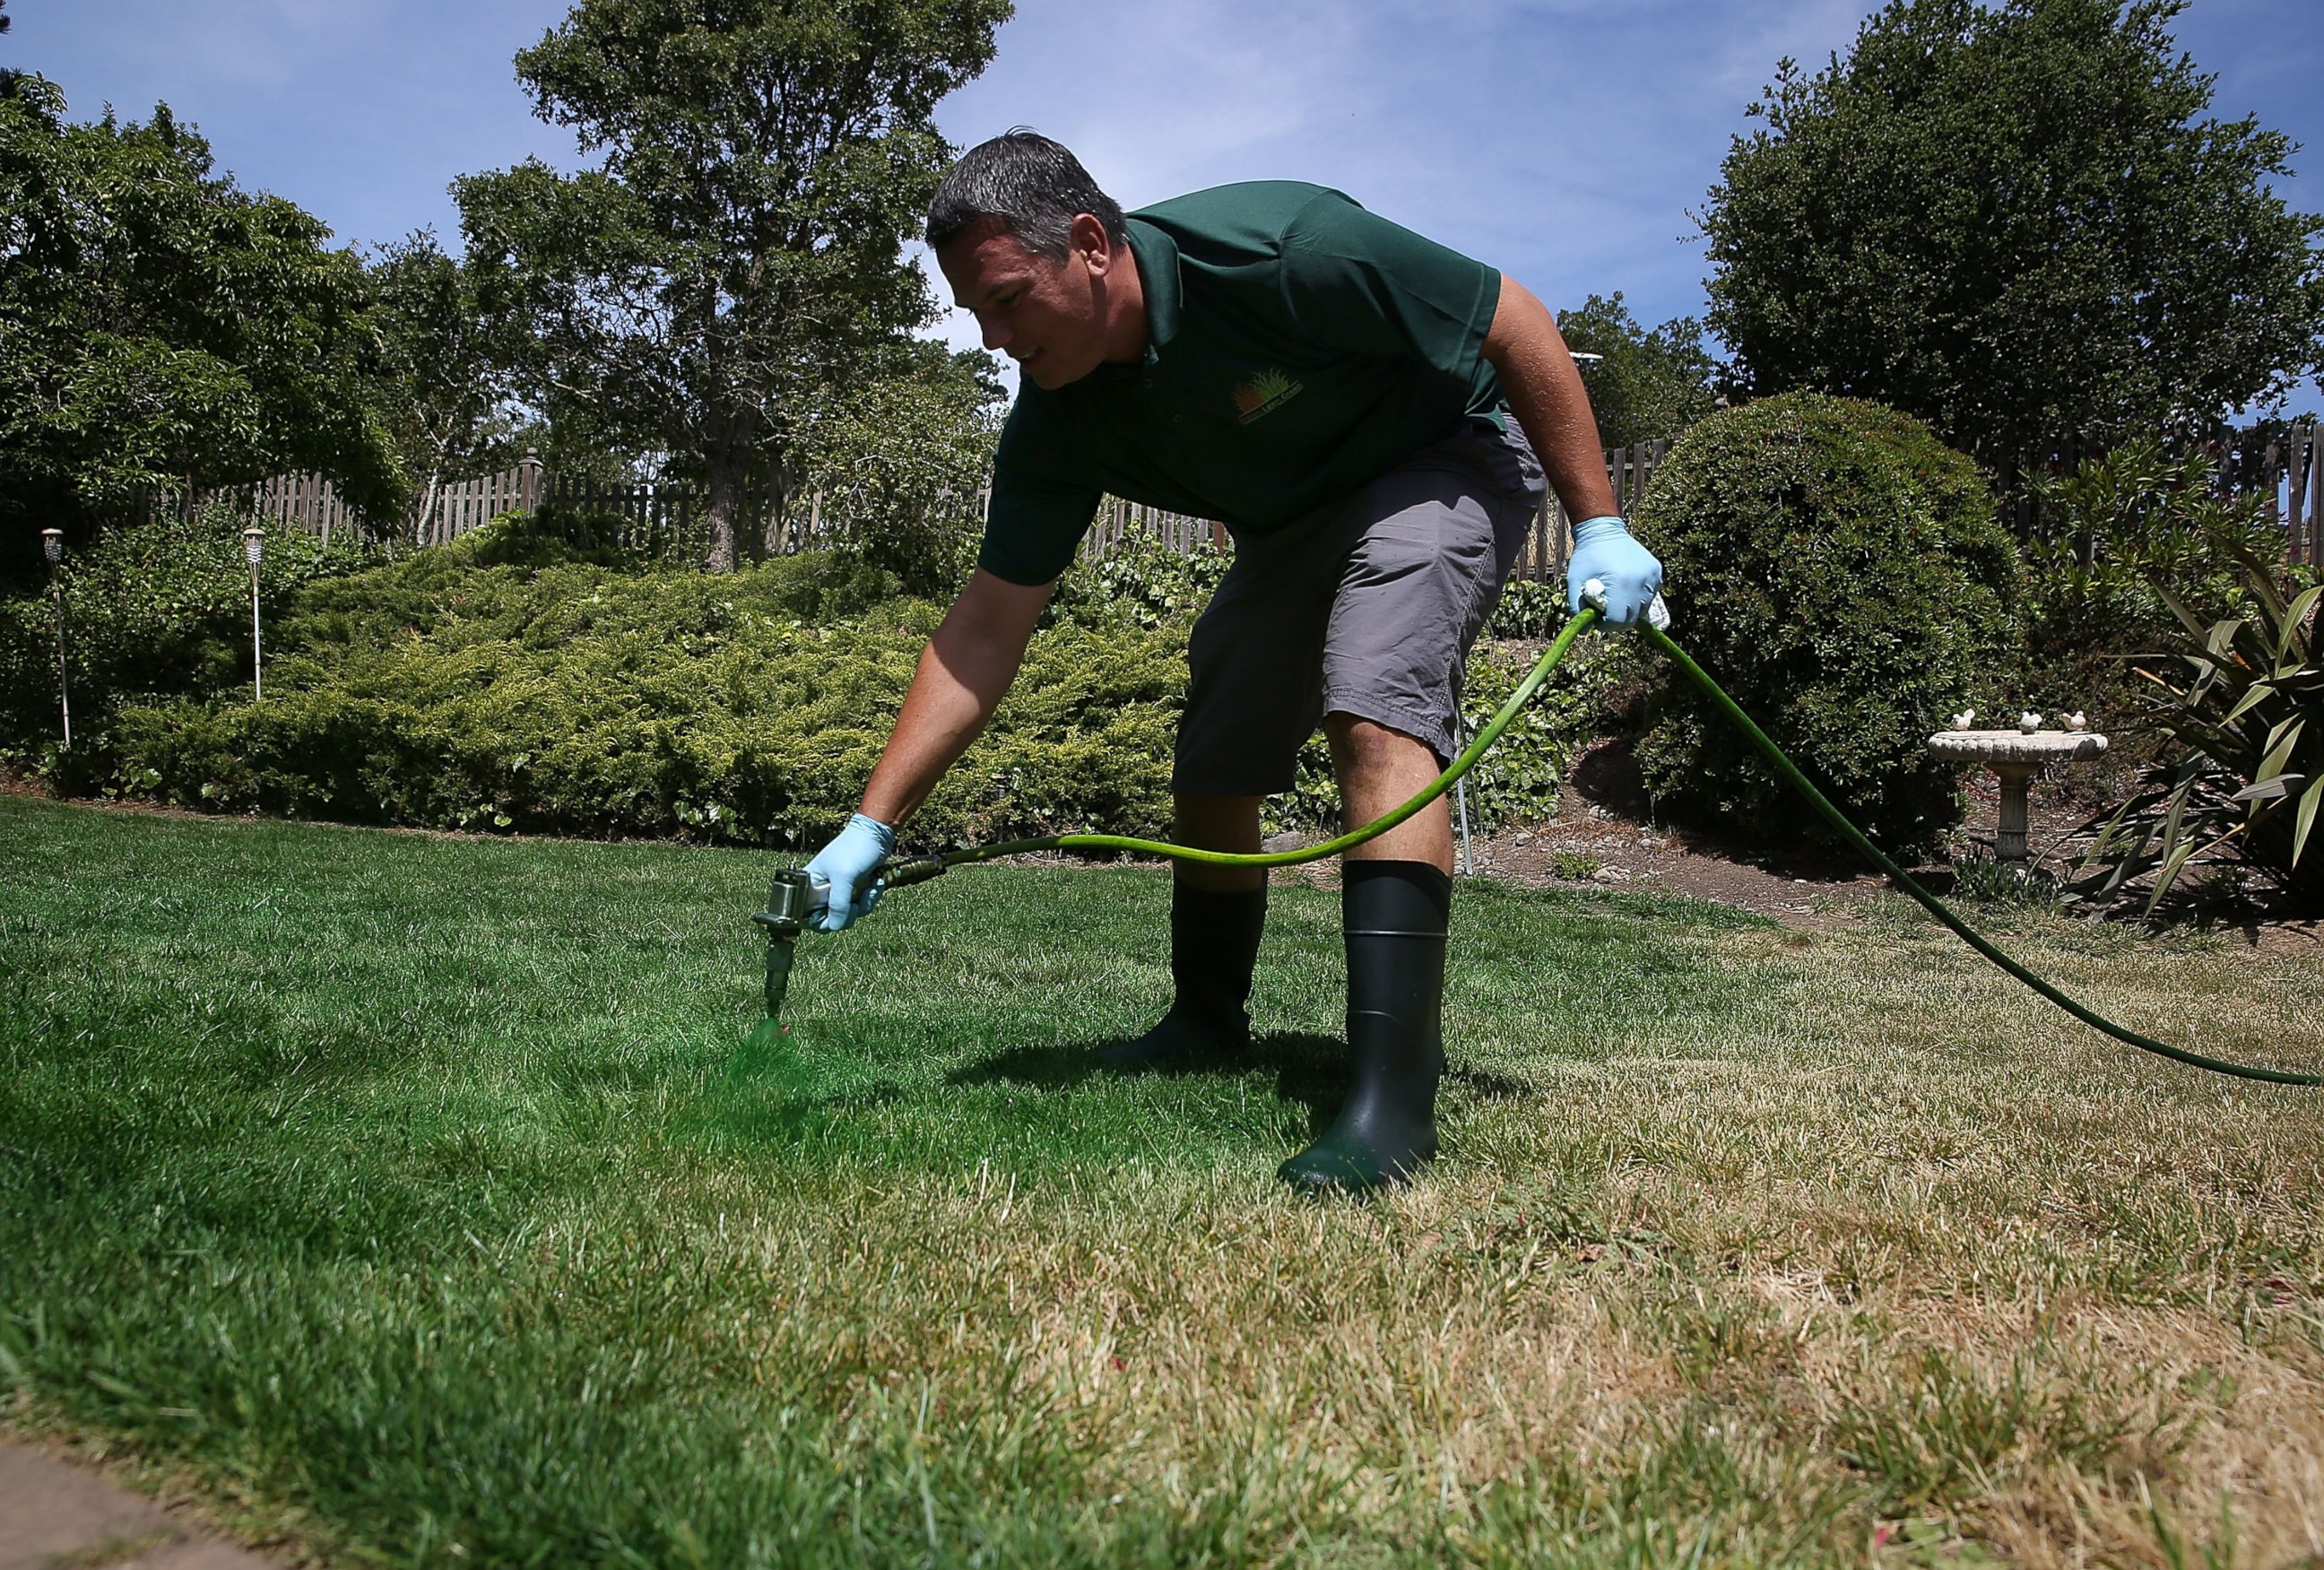 PHOTO: A man applies green paint to a brown lawn on May 29, 2015 in Novato, Calif.